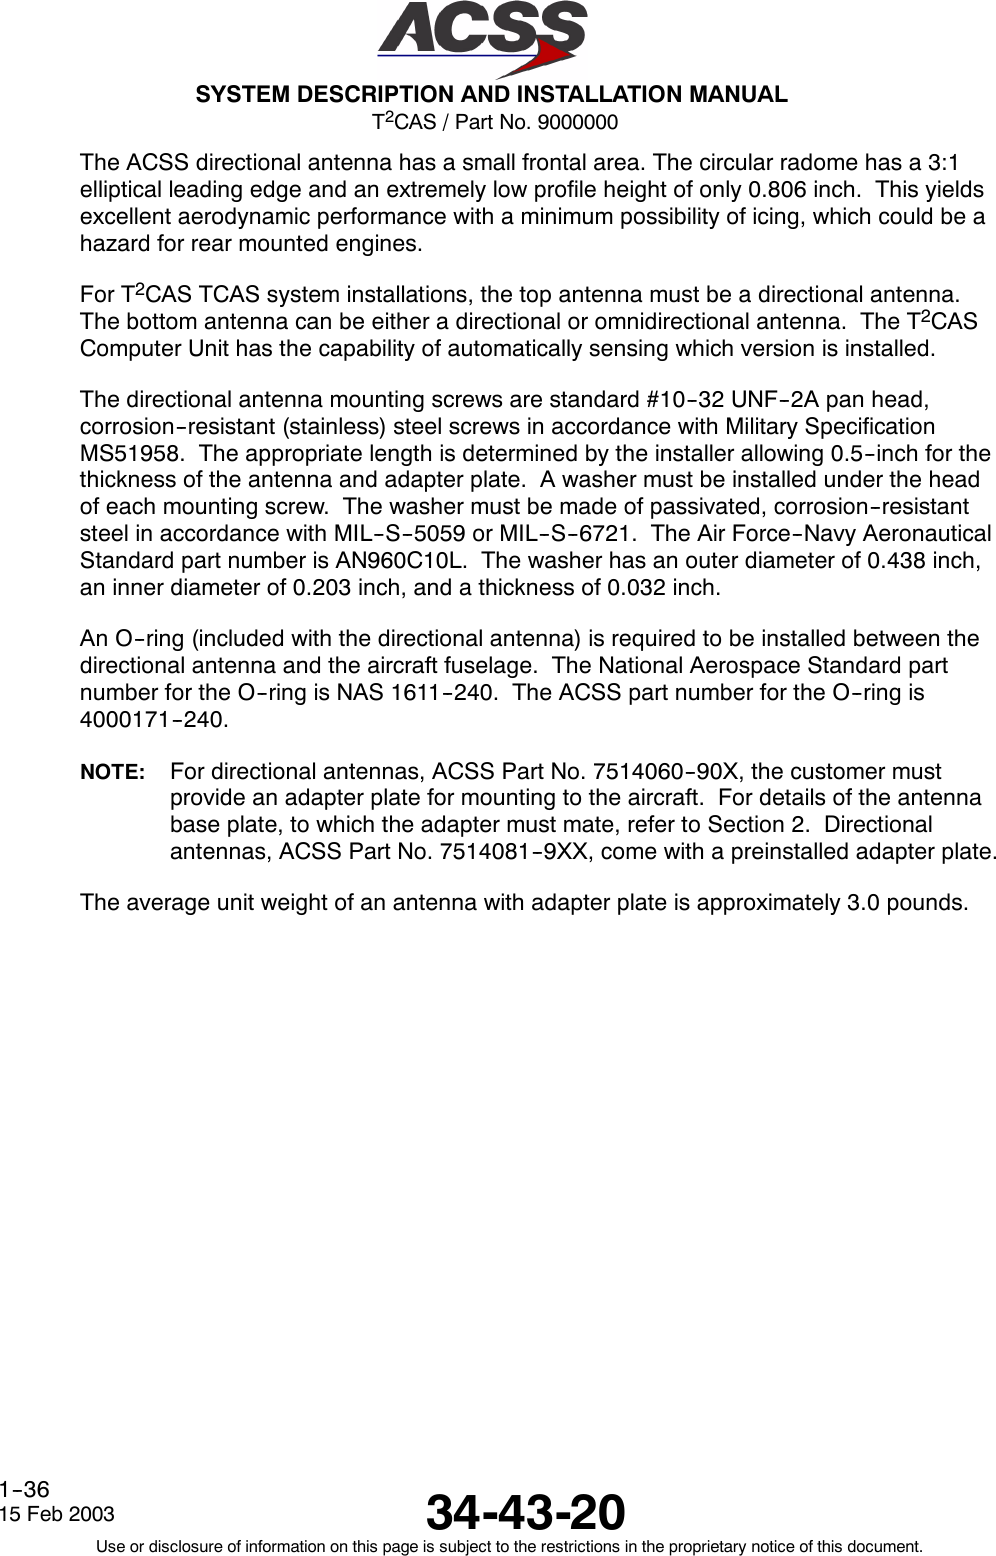 T2CAS / Part No. 9000000SYSTEM DESCRIPTION AND INSTALLATION MANUAL34-43-2015 Feb 2003Use or disclosure of information on this page is subject to the restrictions in the proprietary notice of this document.1--36The ACSS directional antenna has a small frontal area. The circular radome has a 3:1elliptical leading edge and an extremely low profile height of only 0.806 inch. This yieldsexcellent aerodynamic performance with a minimum possibility of icing, which could be ahazard for rear mounted engines.For T2CAS TCAS system installations, the top antenna must be a directional antenna.The bottom antenna can be either a directional or omnidirectional antenna. The T2CASComputer Unit has the capability of automatically sensing which version is installed.The directional antenna mounting screws are standard #10--32 UNF--2A pan head,corrosion--resistant (stainless) steel screws in accordance with Military SpecificationMS51958. The appropriate length is determined by the installer allowing 0.5--inch for thethickness of the antenna and adapter plate. A washer must be installed under the headof each mounting screw. The washer must be made of passivated, corrosion--resistantsteel in accordance with MIL--S--5059 or MIL--S--6721. The Air Force--Navy AeronauticalStandard part number is AN960C10L. The washer has an outer diameter of 0.438 inch,an inner diameter of 0.203 inch, and a thickness of 0.032 inch.An O--ring (included with the directional antenna) is required to be installed between thedirectional antenna and the aircraft fuselage. The National Aerospace Standard partnumber for the O--ring is NAS 1611--240. The ACSS part number for the O--ring is4000171--240.NOTE: For directional antennas, ACSS Part No. 7514060--90X, the customer mustprovide an adapter plate for mounting to the aircraft. For details of the antennabase plate, to which the adapter must mate, refer to Section 2. Directionalantennas, ACSS Part No. 7514081--9XX, come with a preinstalled adapter plate.The average unit weight of an antenna with adapter plate is approximately 3.0 pounds.